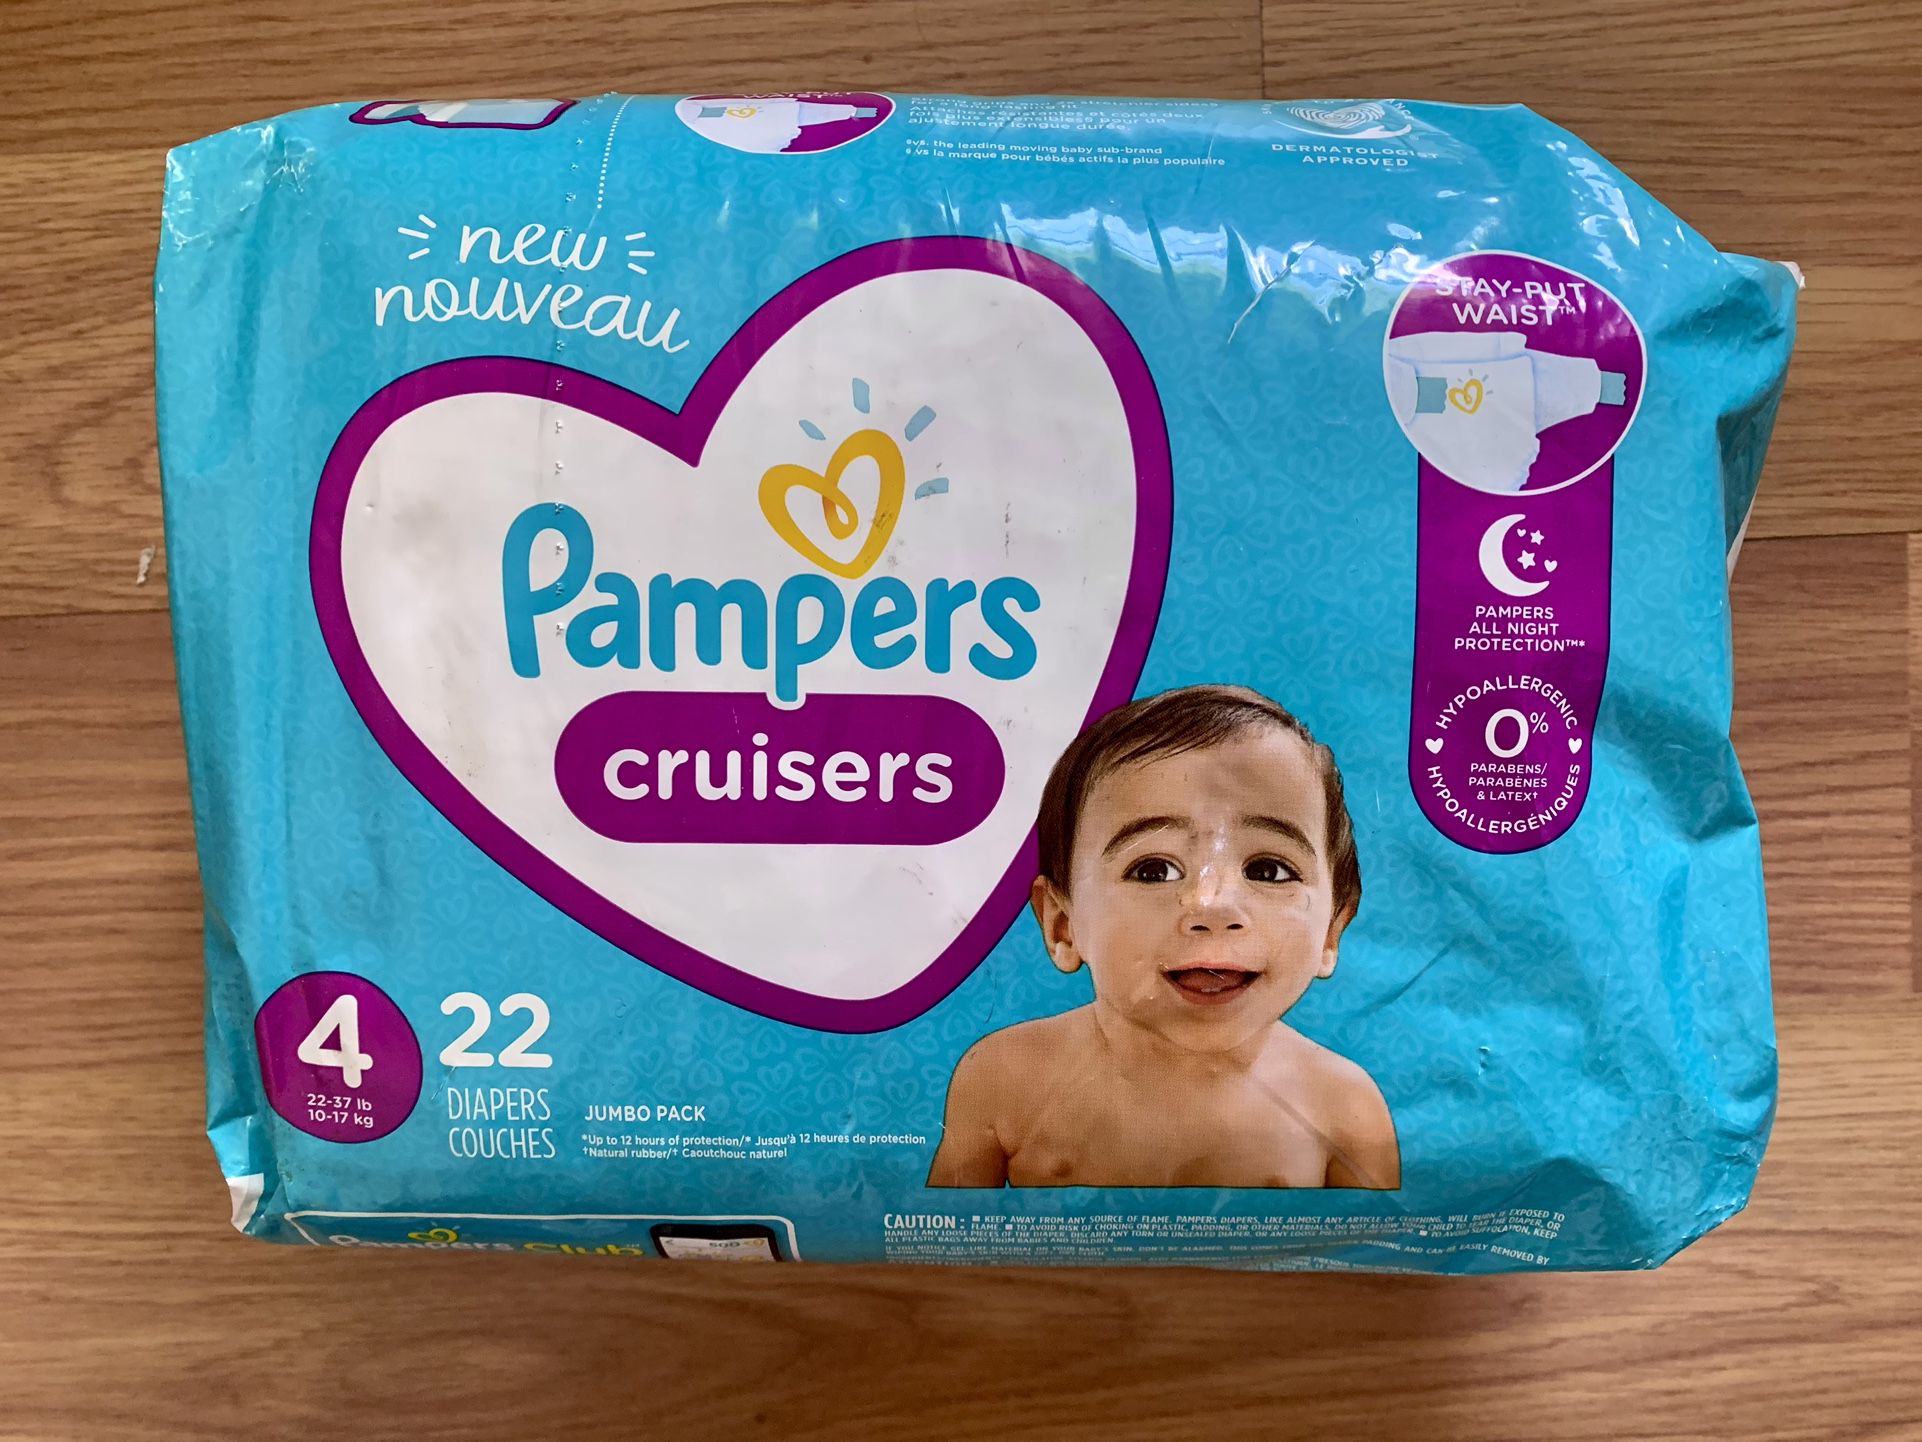 New size 4 Diapers $10